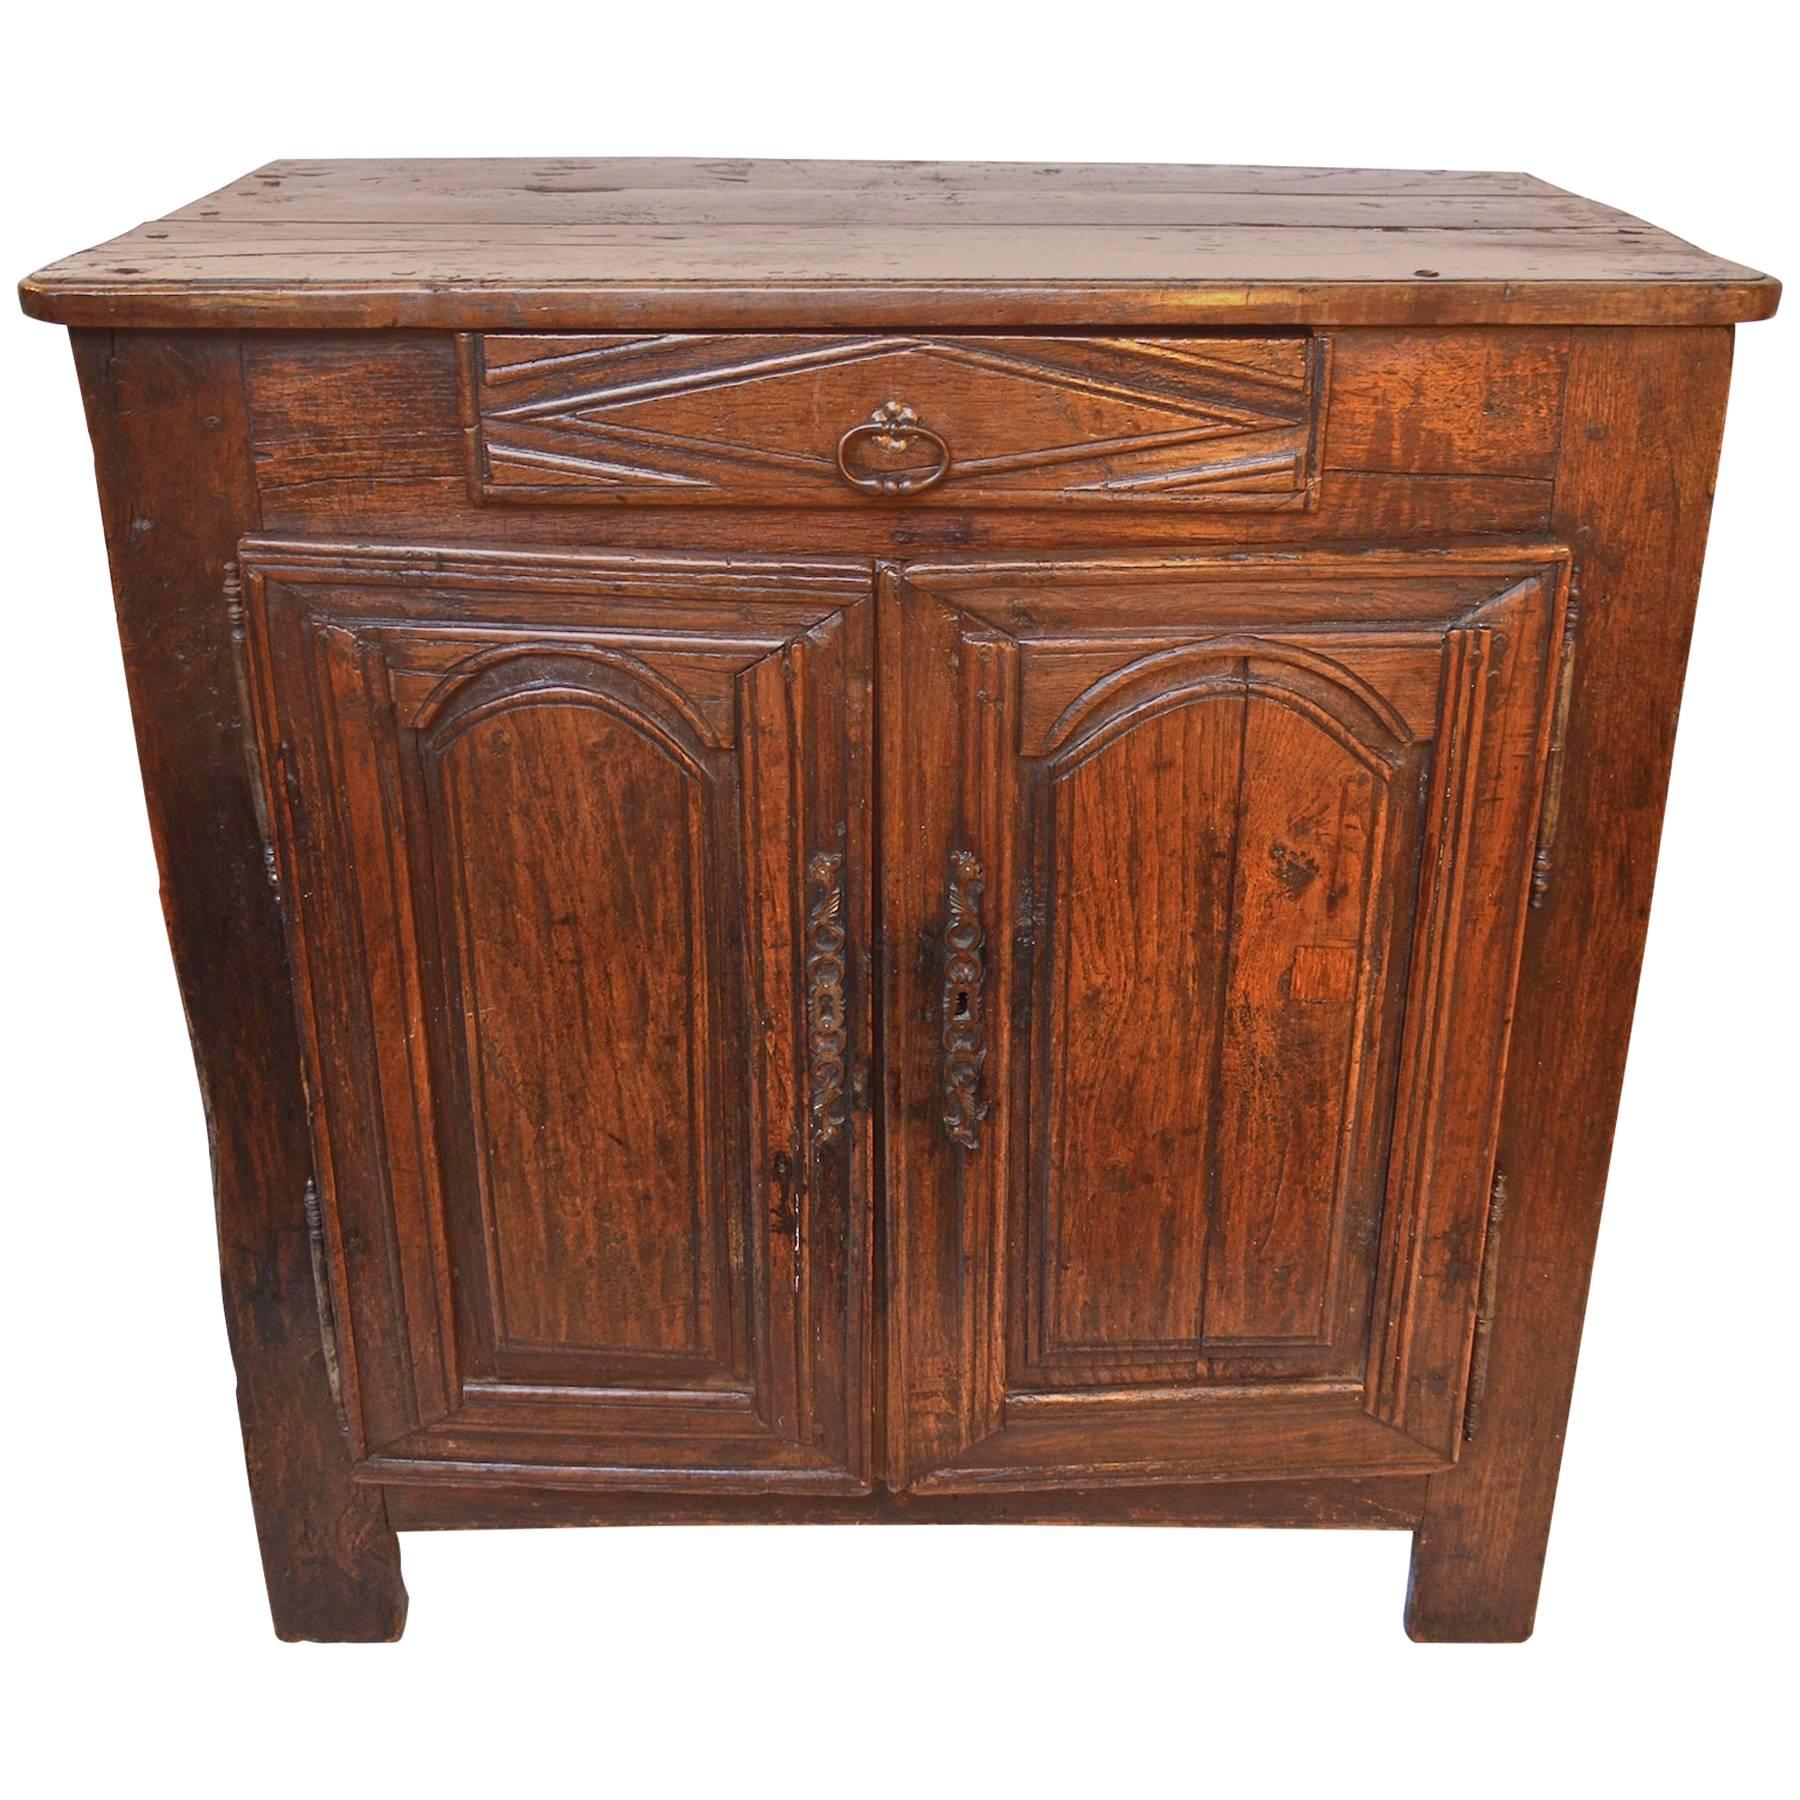 A stunning and unusual 17th century buffet of a petite size. Pegged construction of oak throughout gives this rustic, yet refined antique an incredible presence. A simple, short drawer perches above two hinged and hand-carved paneled doors. Paneled